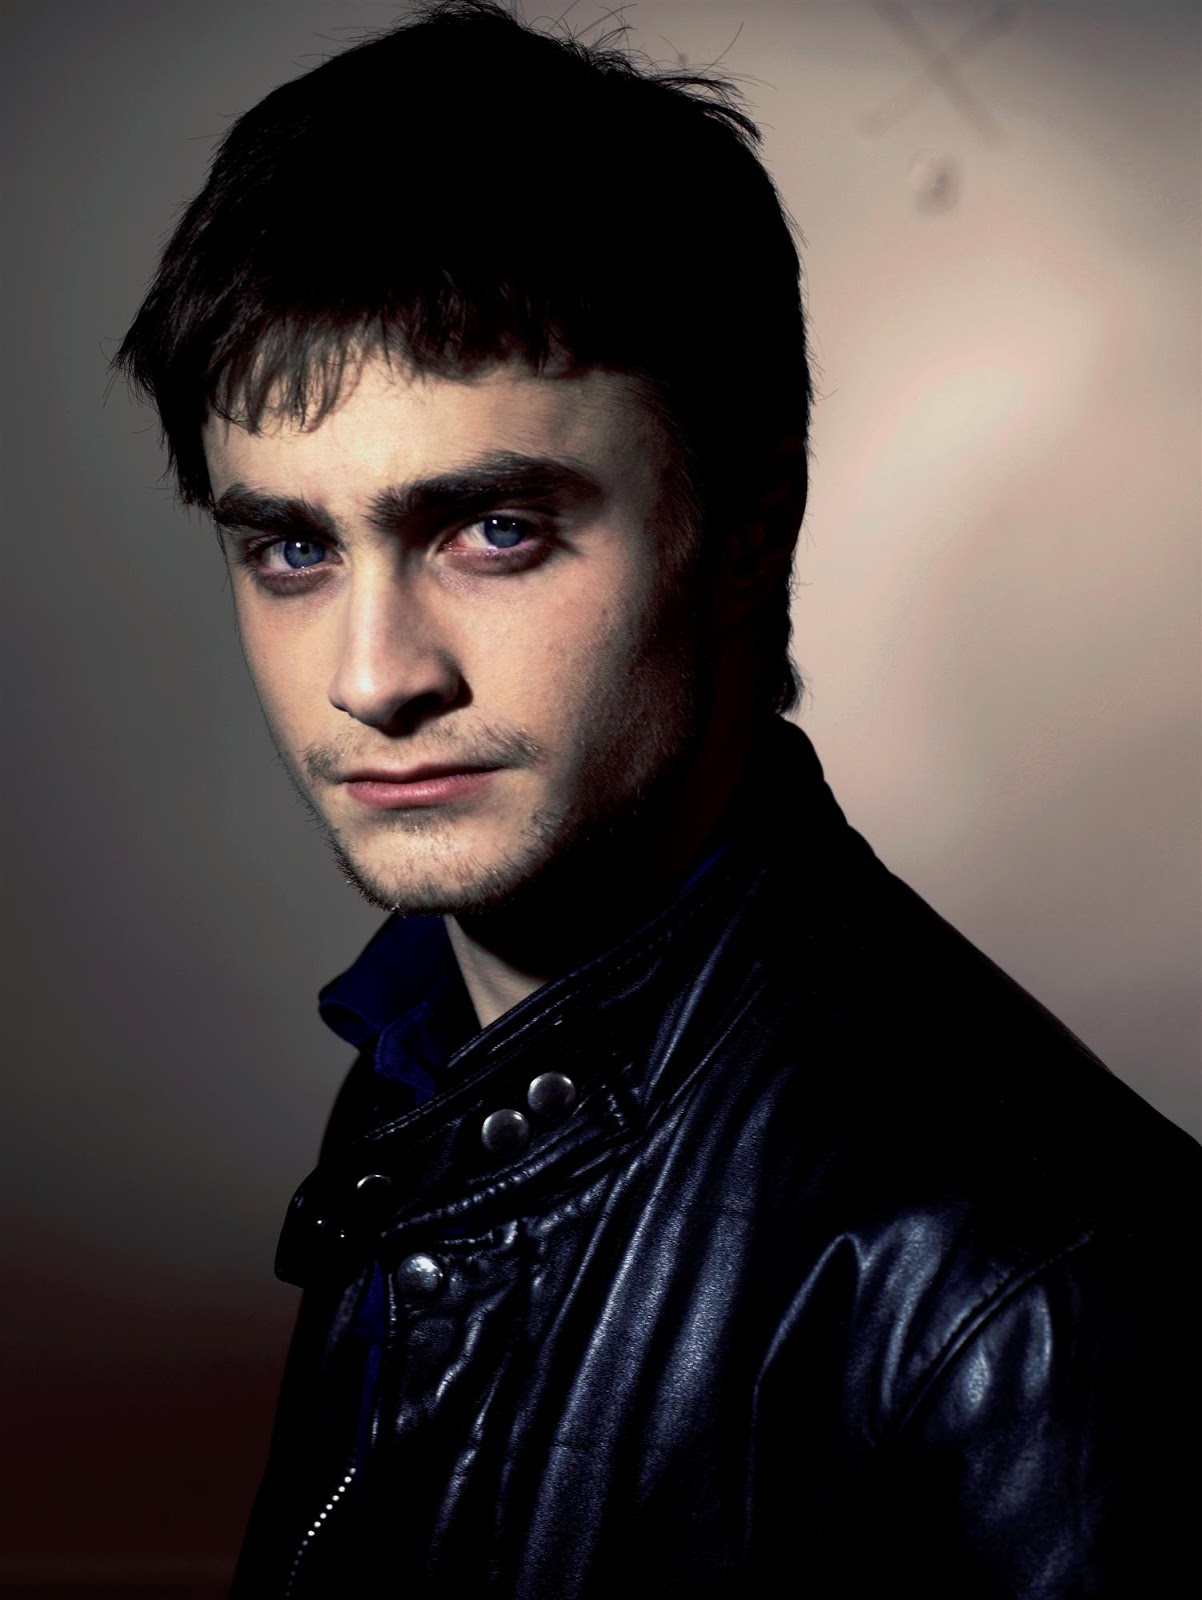 Chatter Busy: Daniel Radcliffe Net Worth